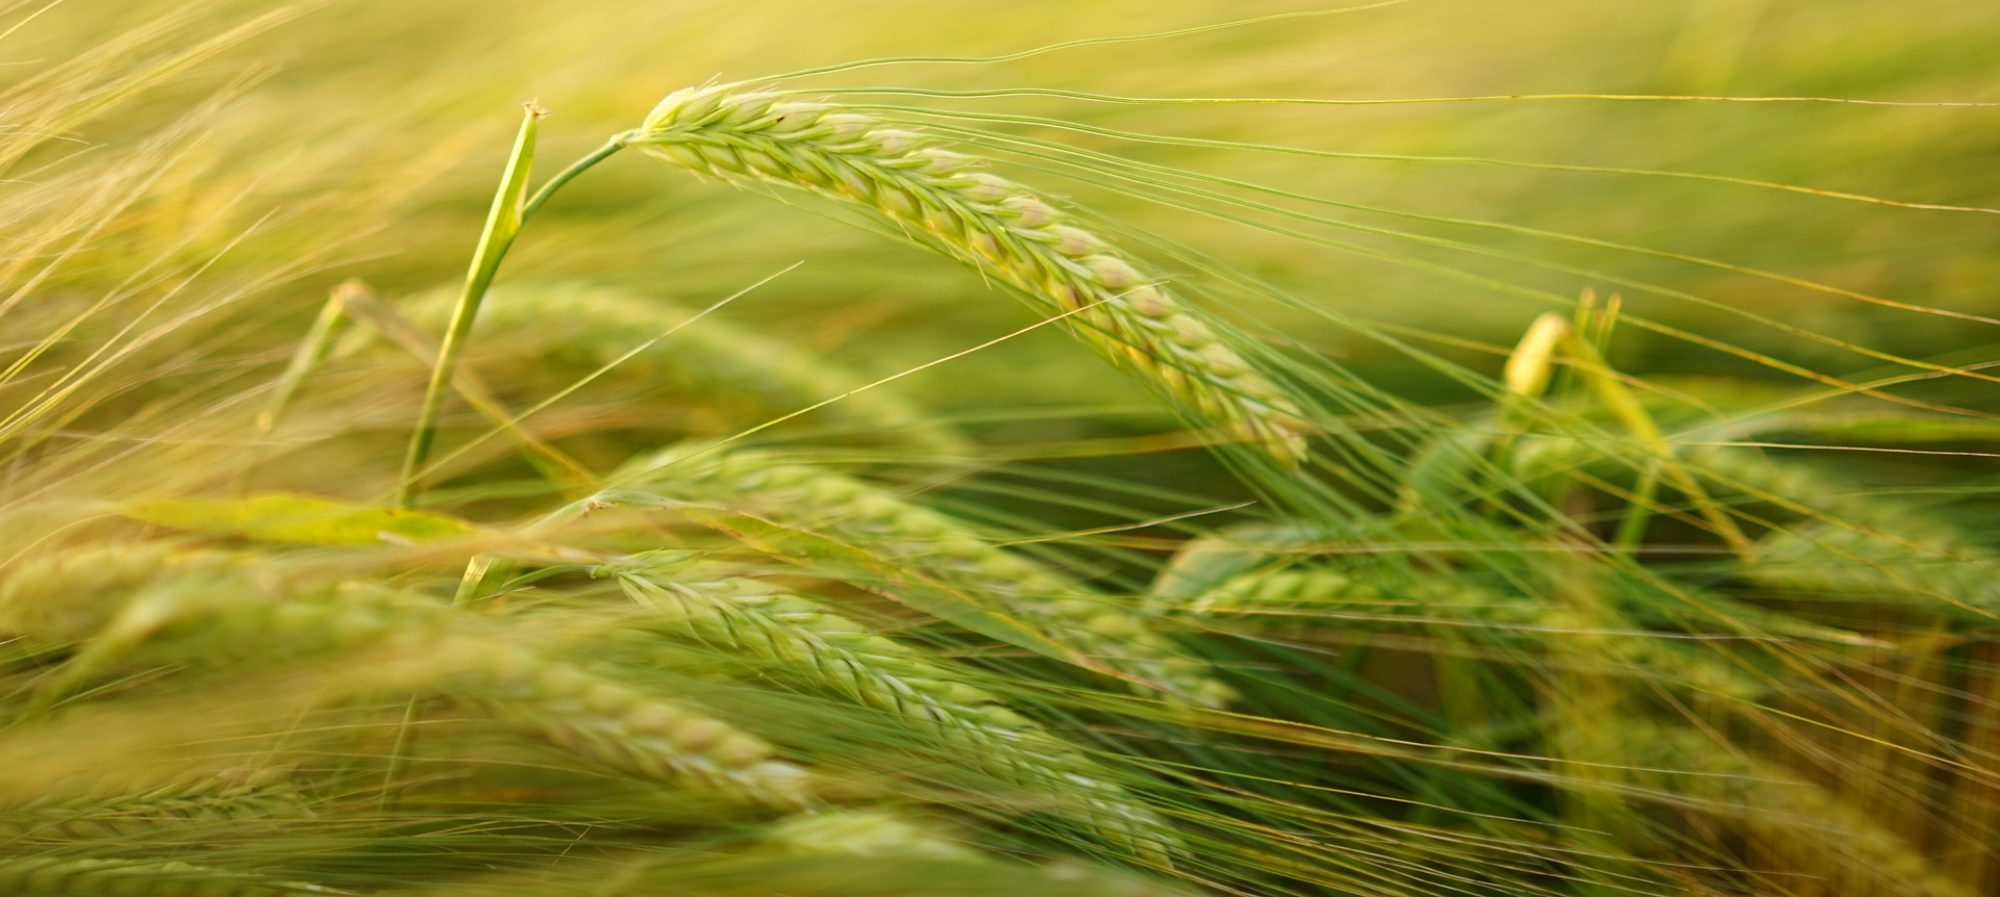 Image of Barley from Ag Service Boards Alberta